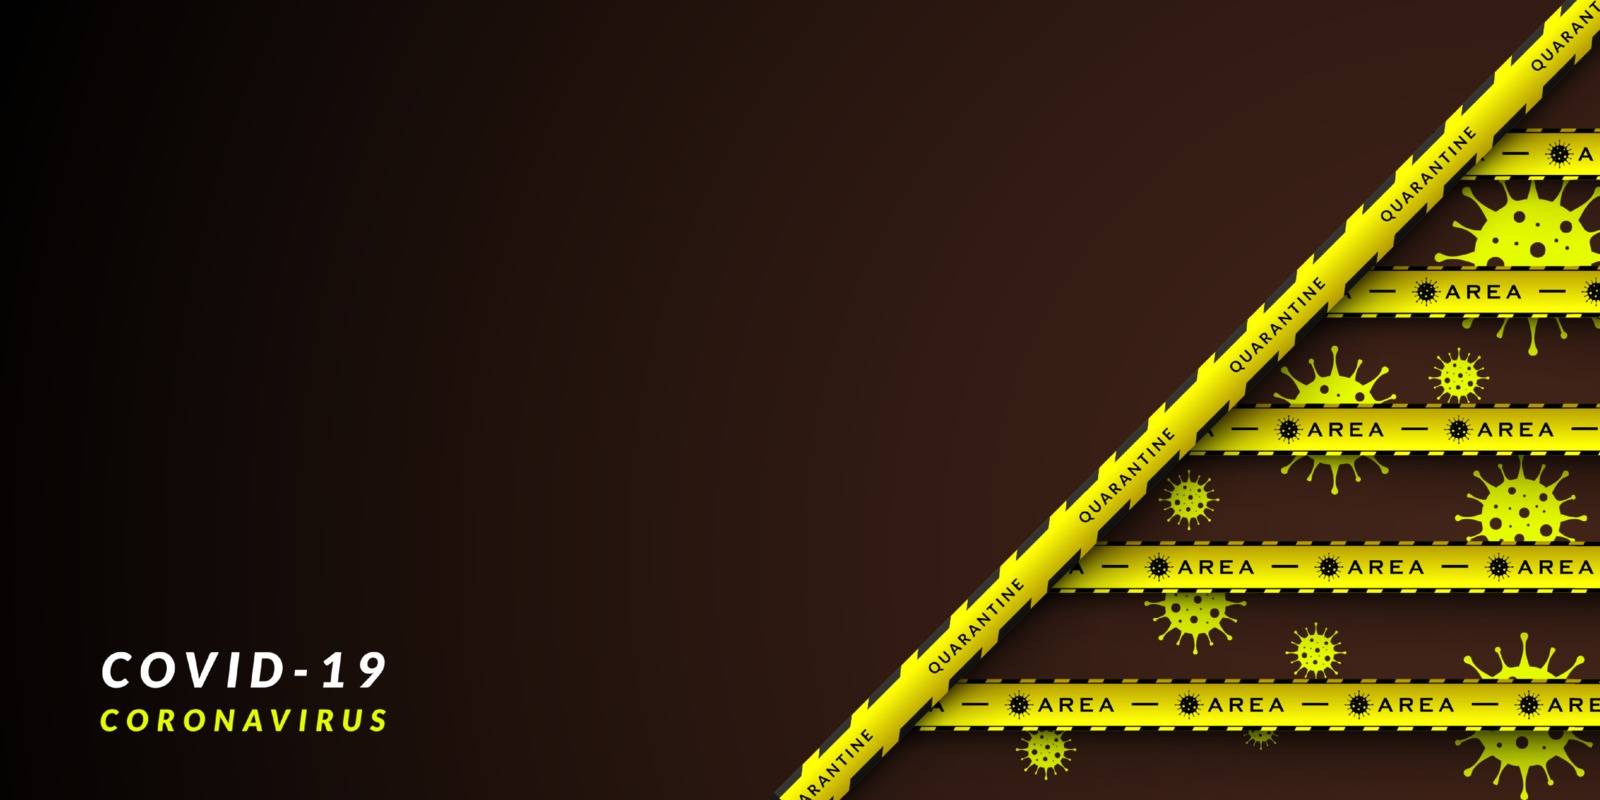 Vector design of corona virus danger warning in yellow and black stripes. Background with copy space. Dividing area Covid-19, quarantine, lockdown.